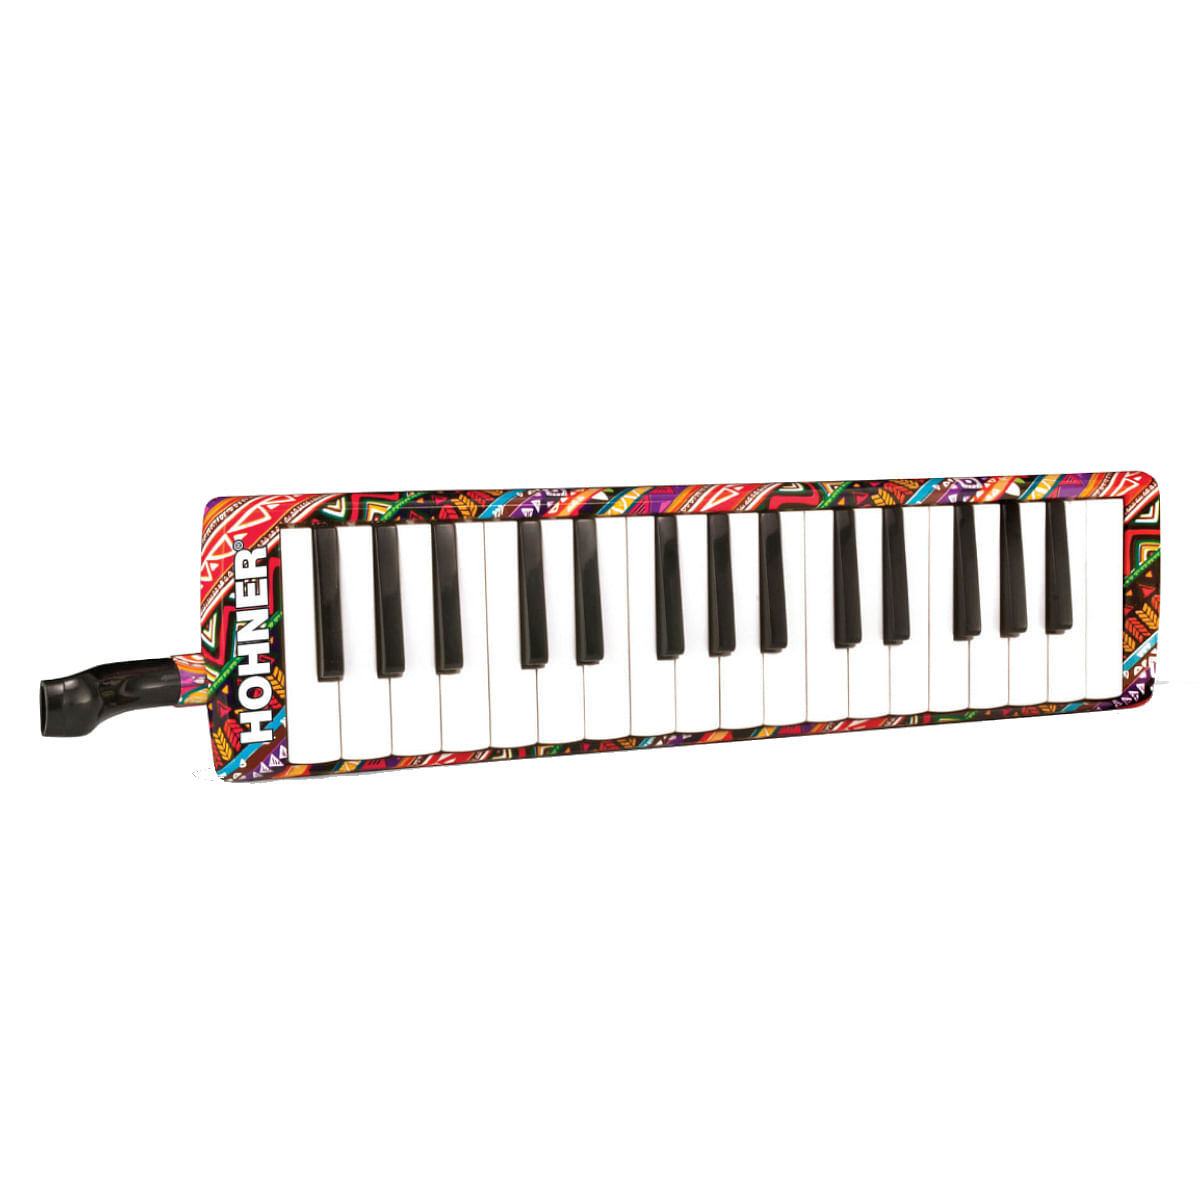 HOHNER ホーナー Melodica Airboard Carbon 32 鍵盤ハーモニカ - 鍵盤